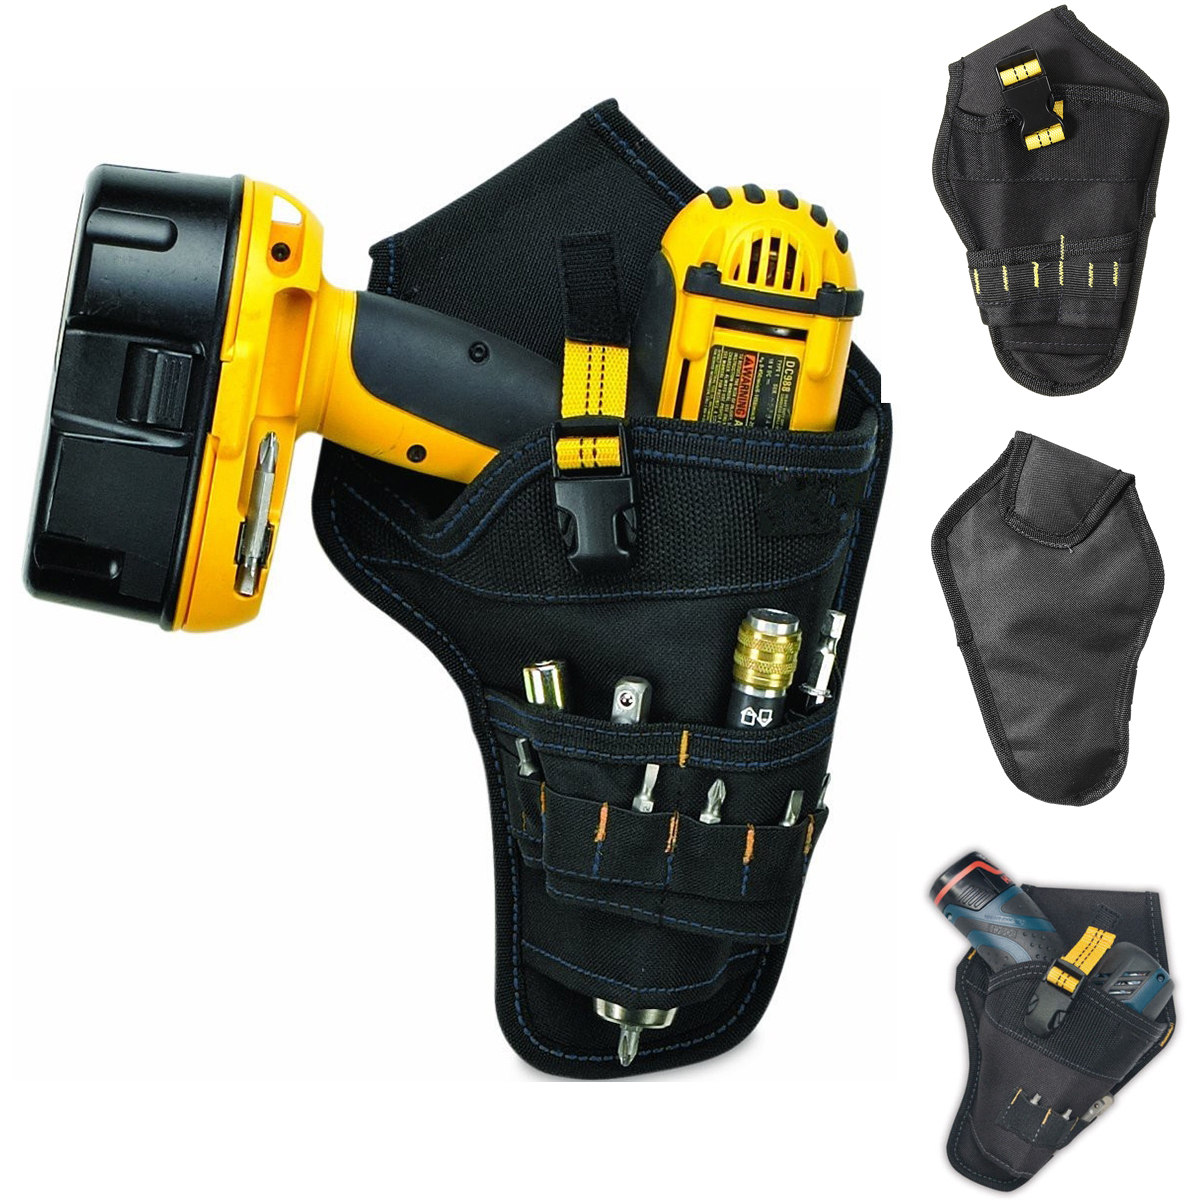 Heavy-Duty-Cordless-Impact-Drill-Holster-Tool-Bag-Belt-Pouch-Pocket-Holder-1187146-1